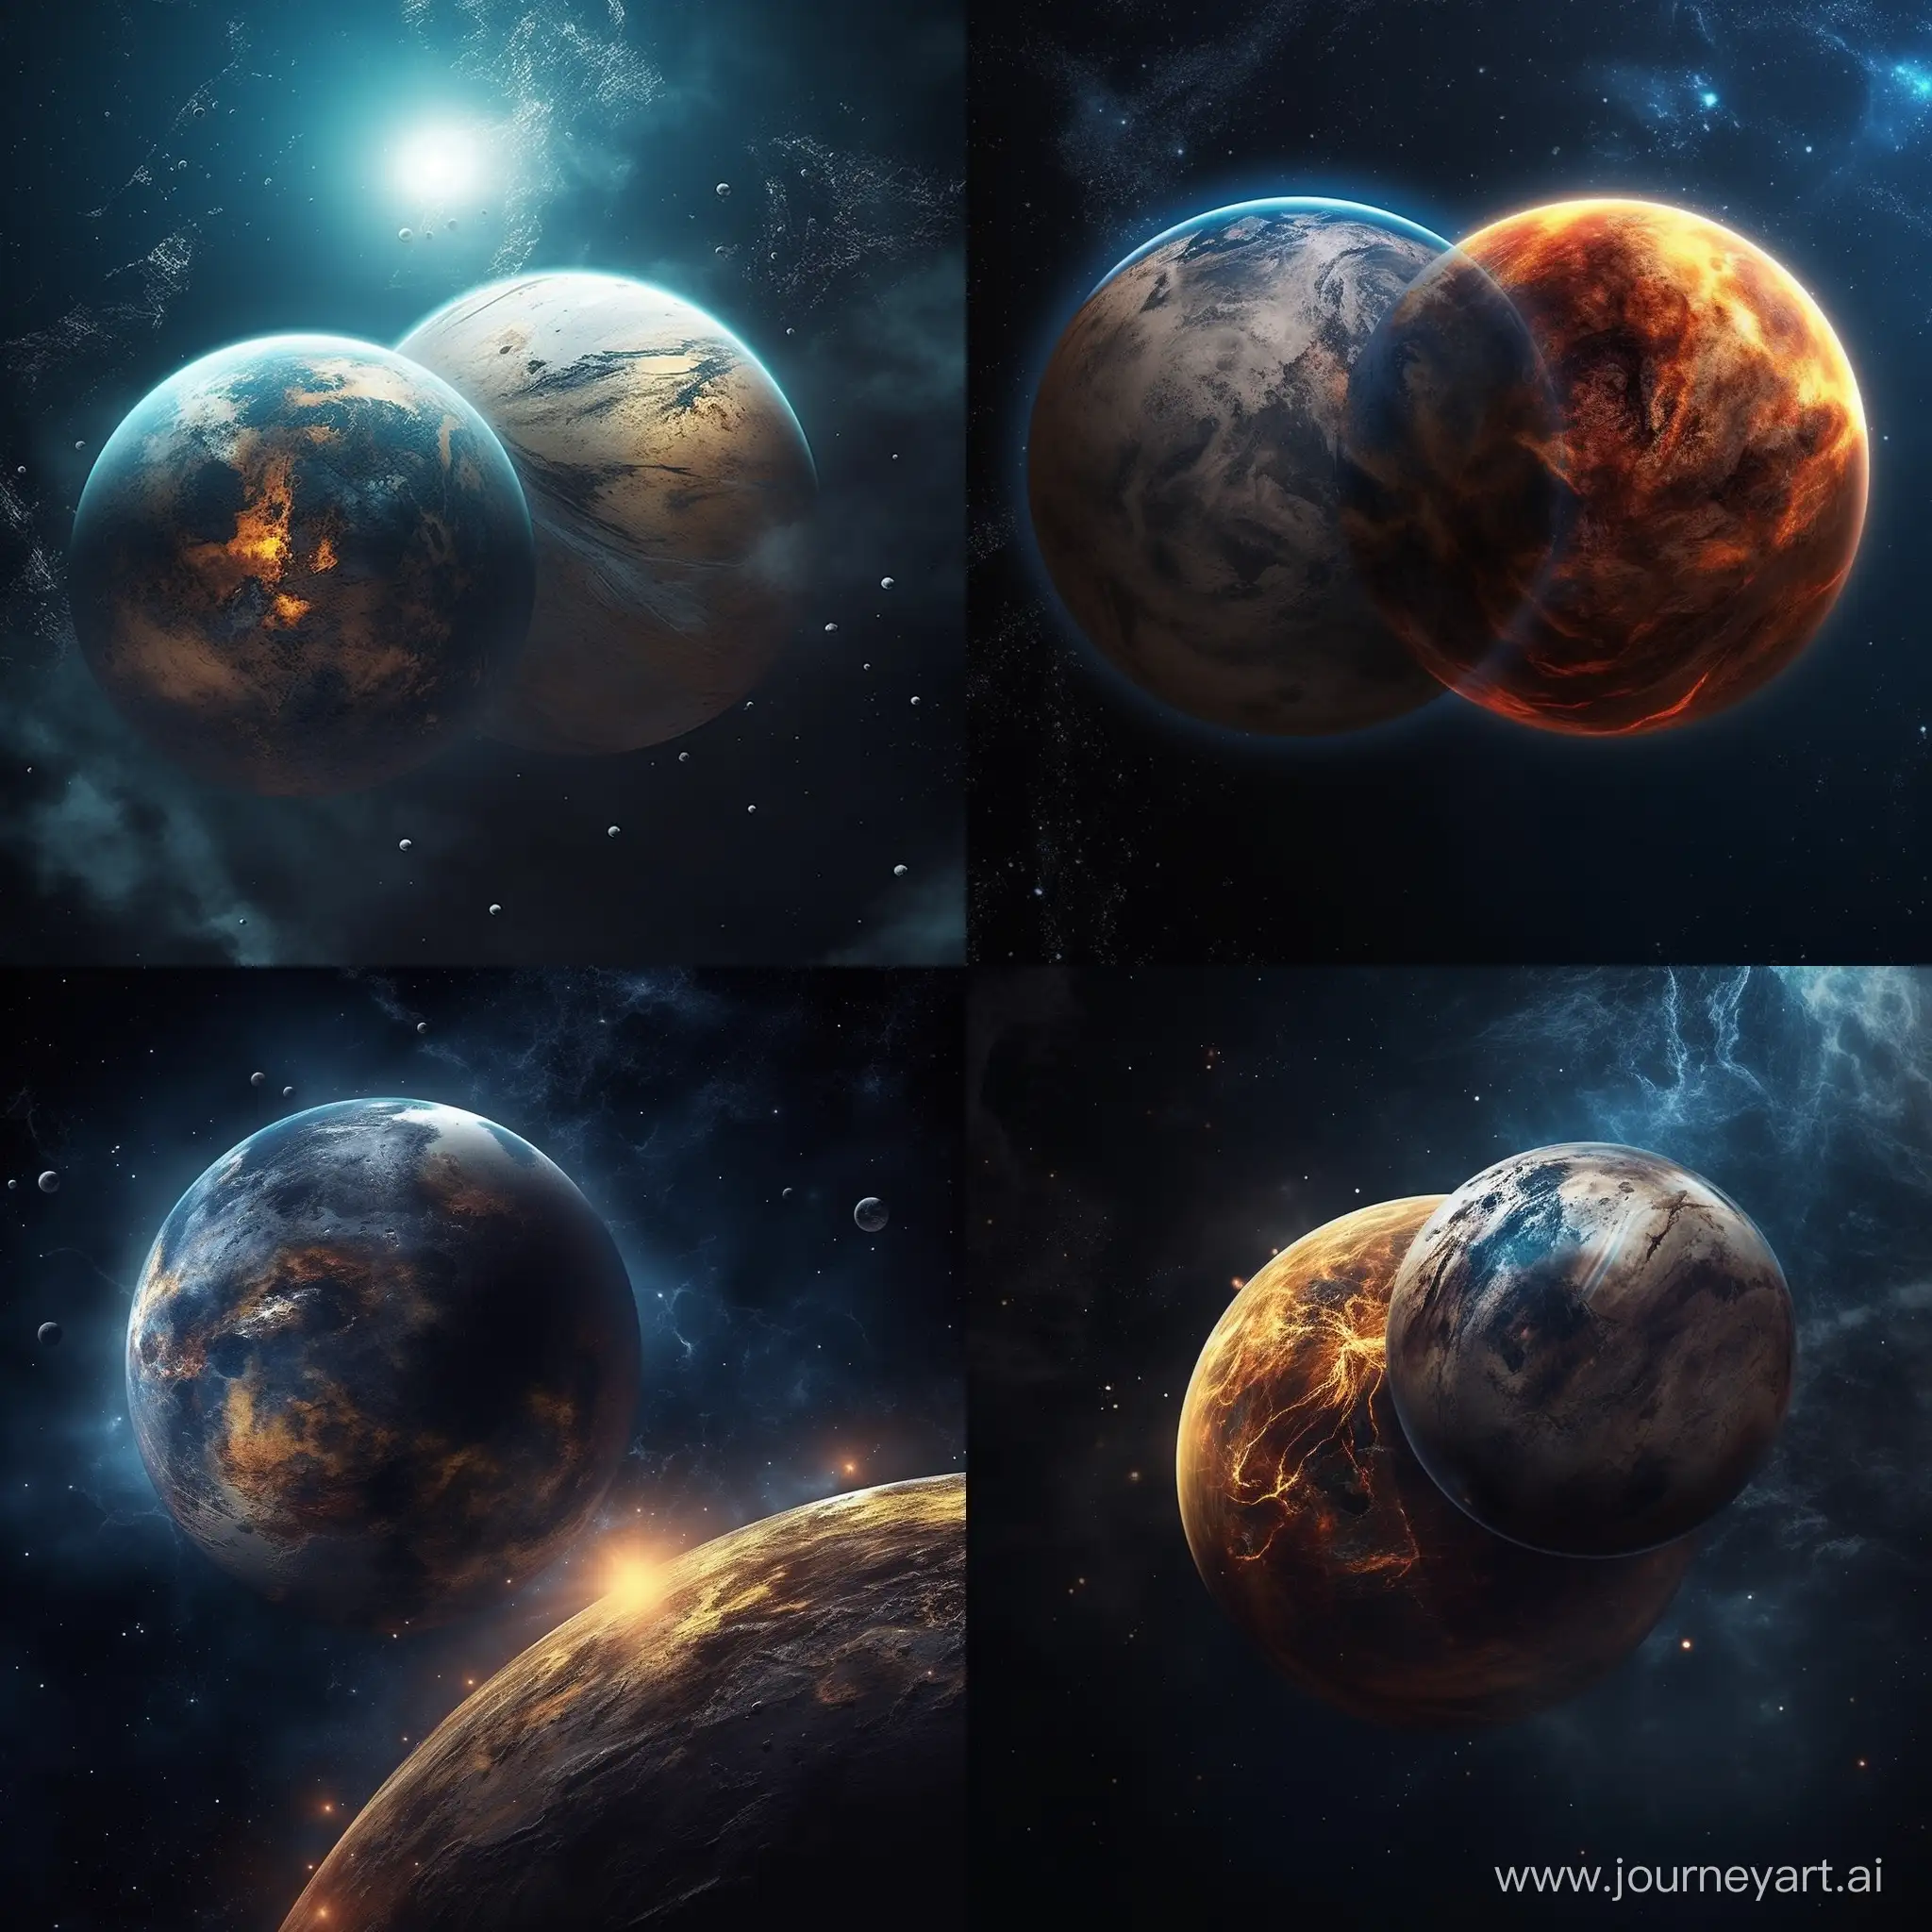 Realistic-Depiction-of-Earth-Mars-and-Jupiter-in-Dark-Yellow-and-Dark-Blue-Tones